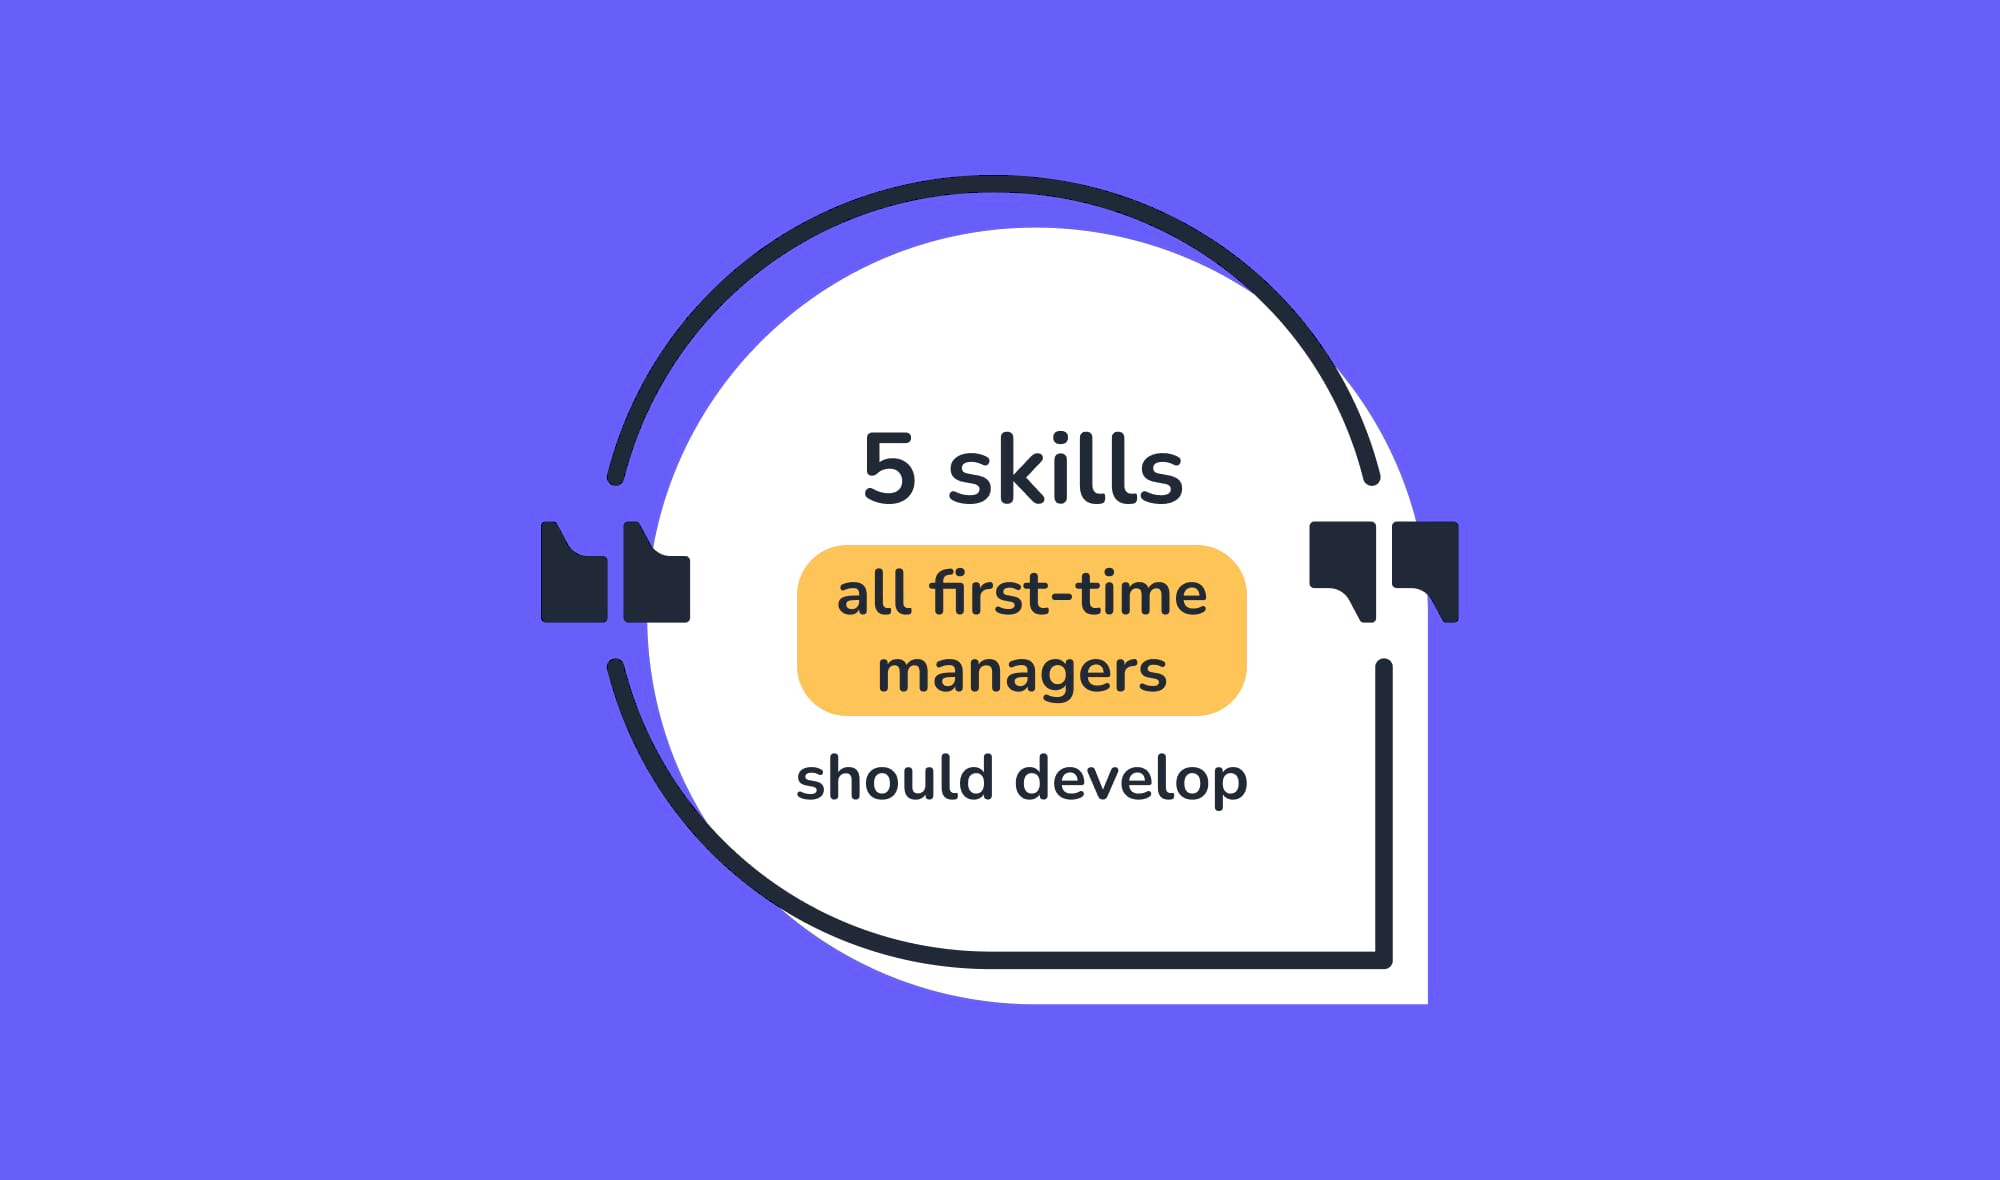 5 skills all first-time managers should develop